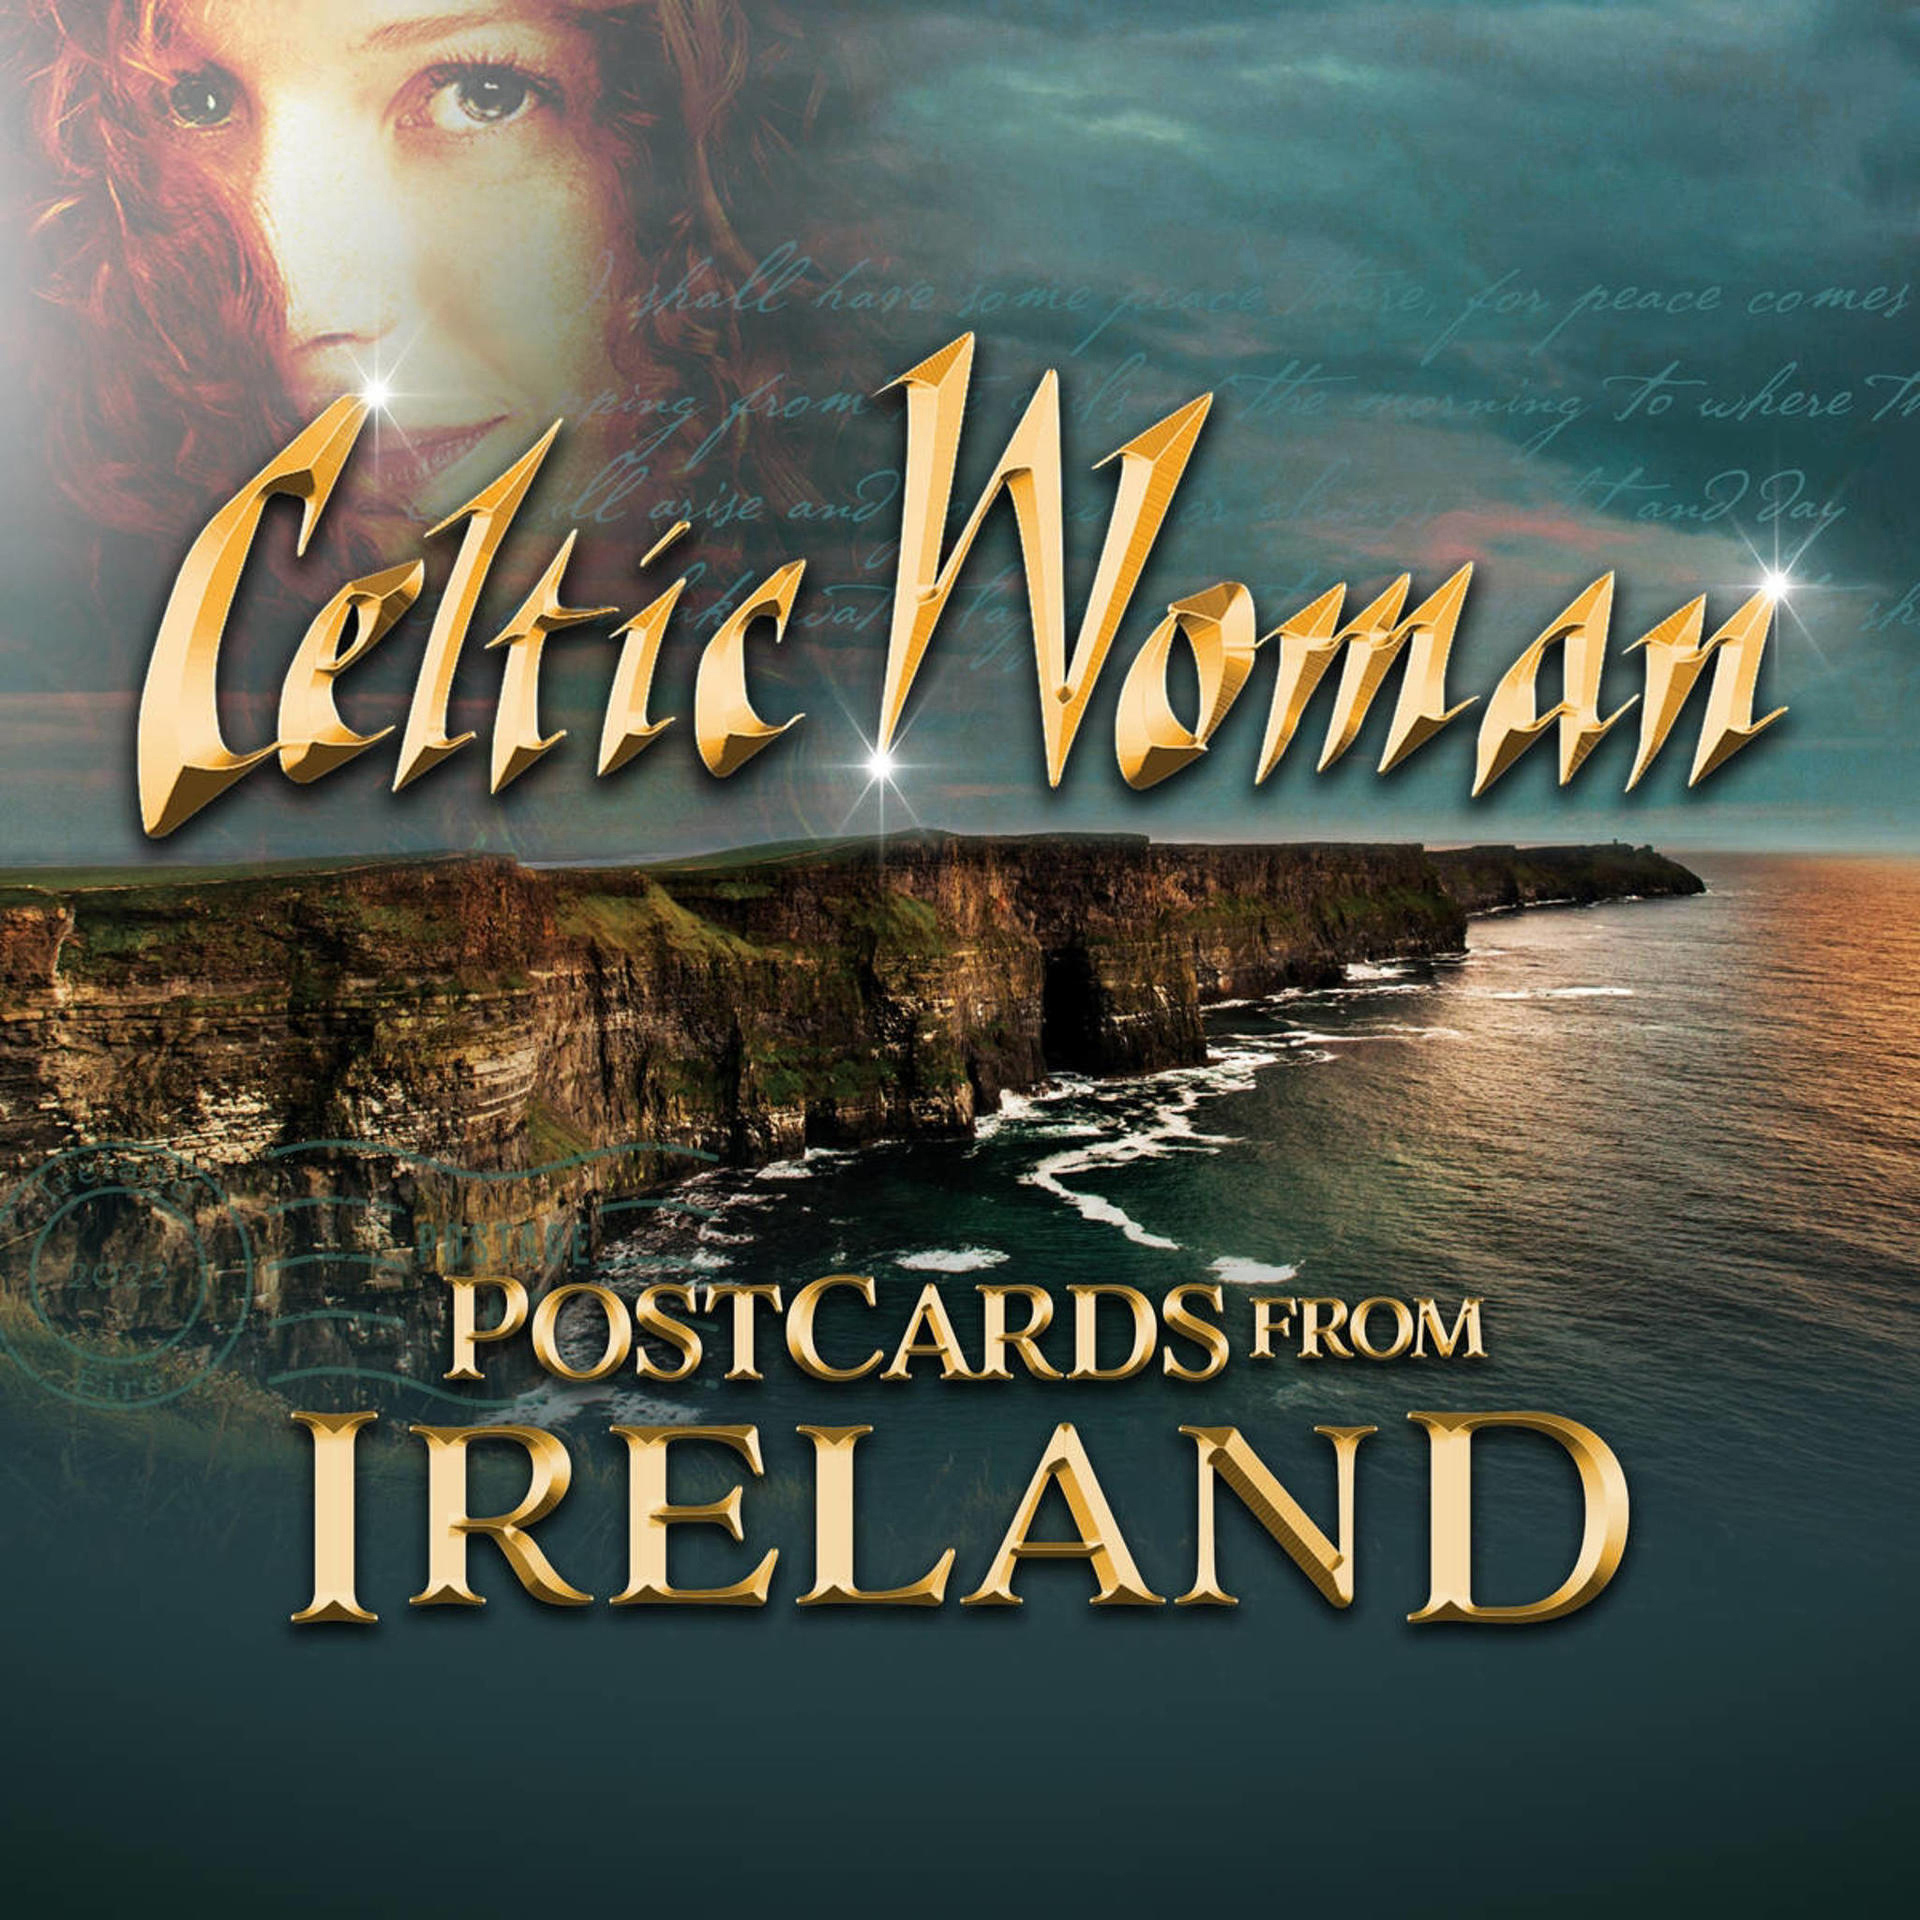 Celtic Woman - Postcards From (DVD) - Ireland